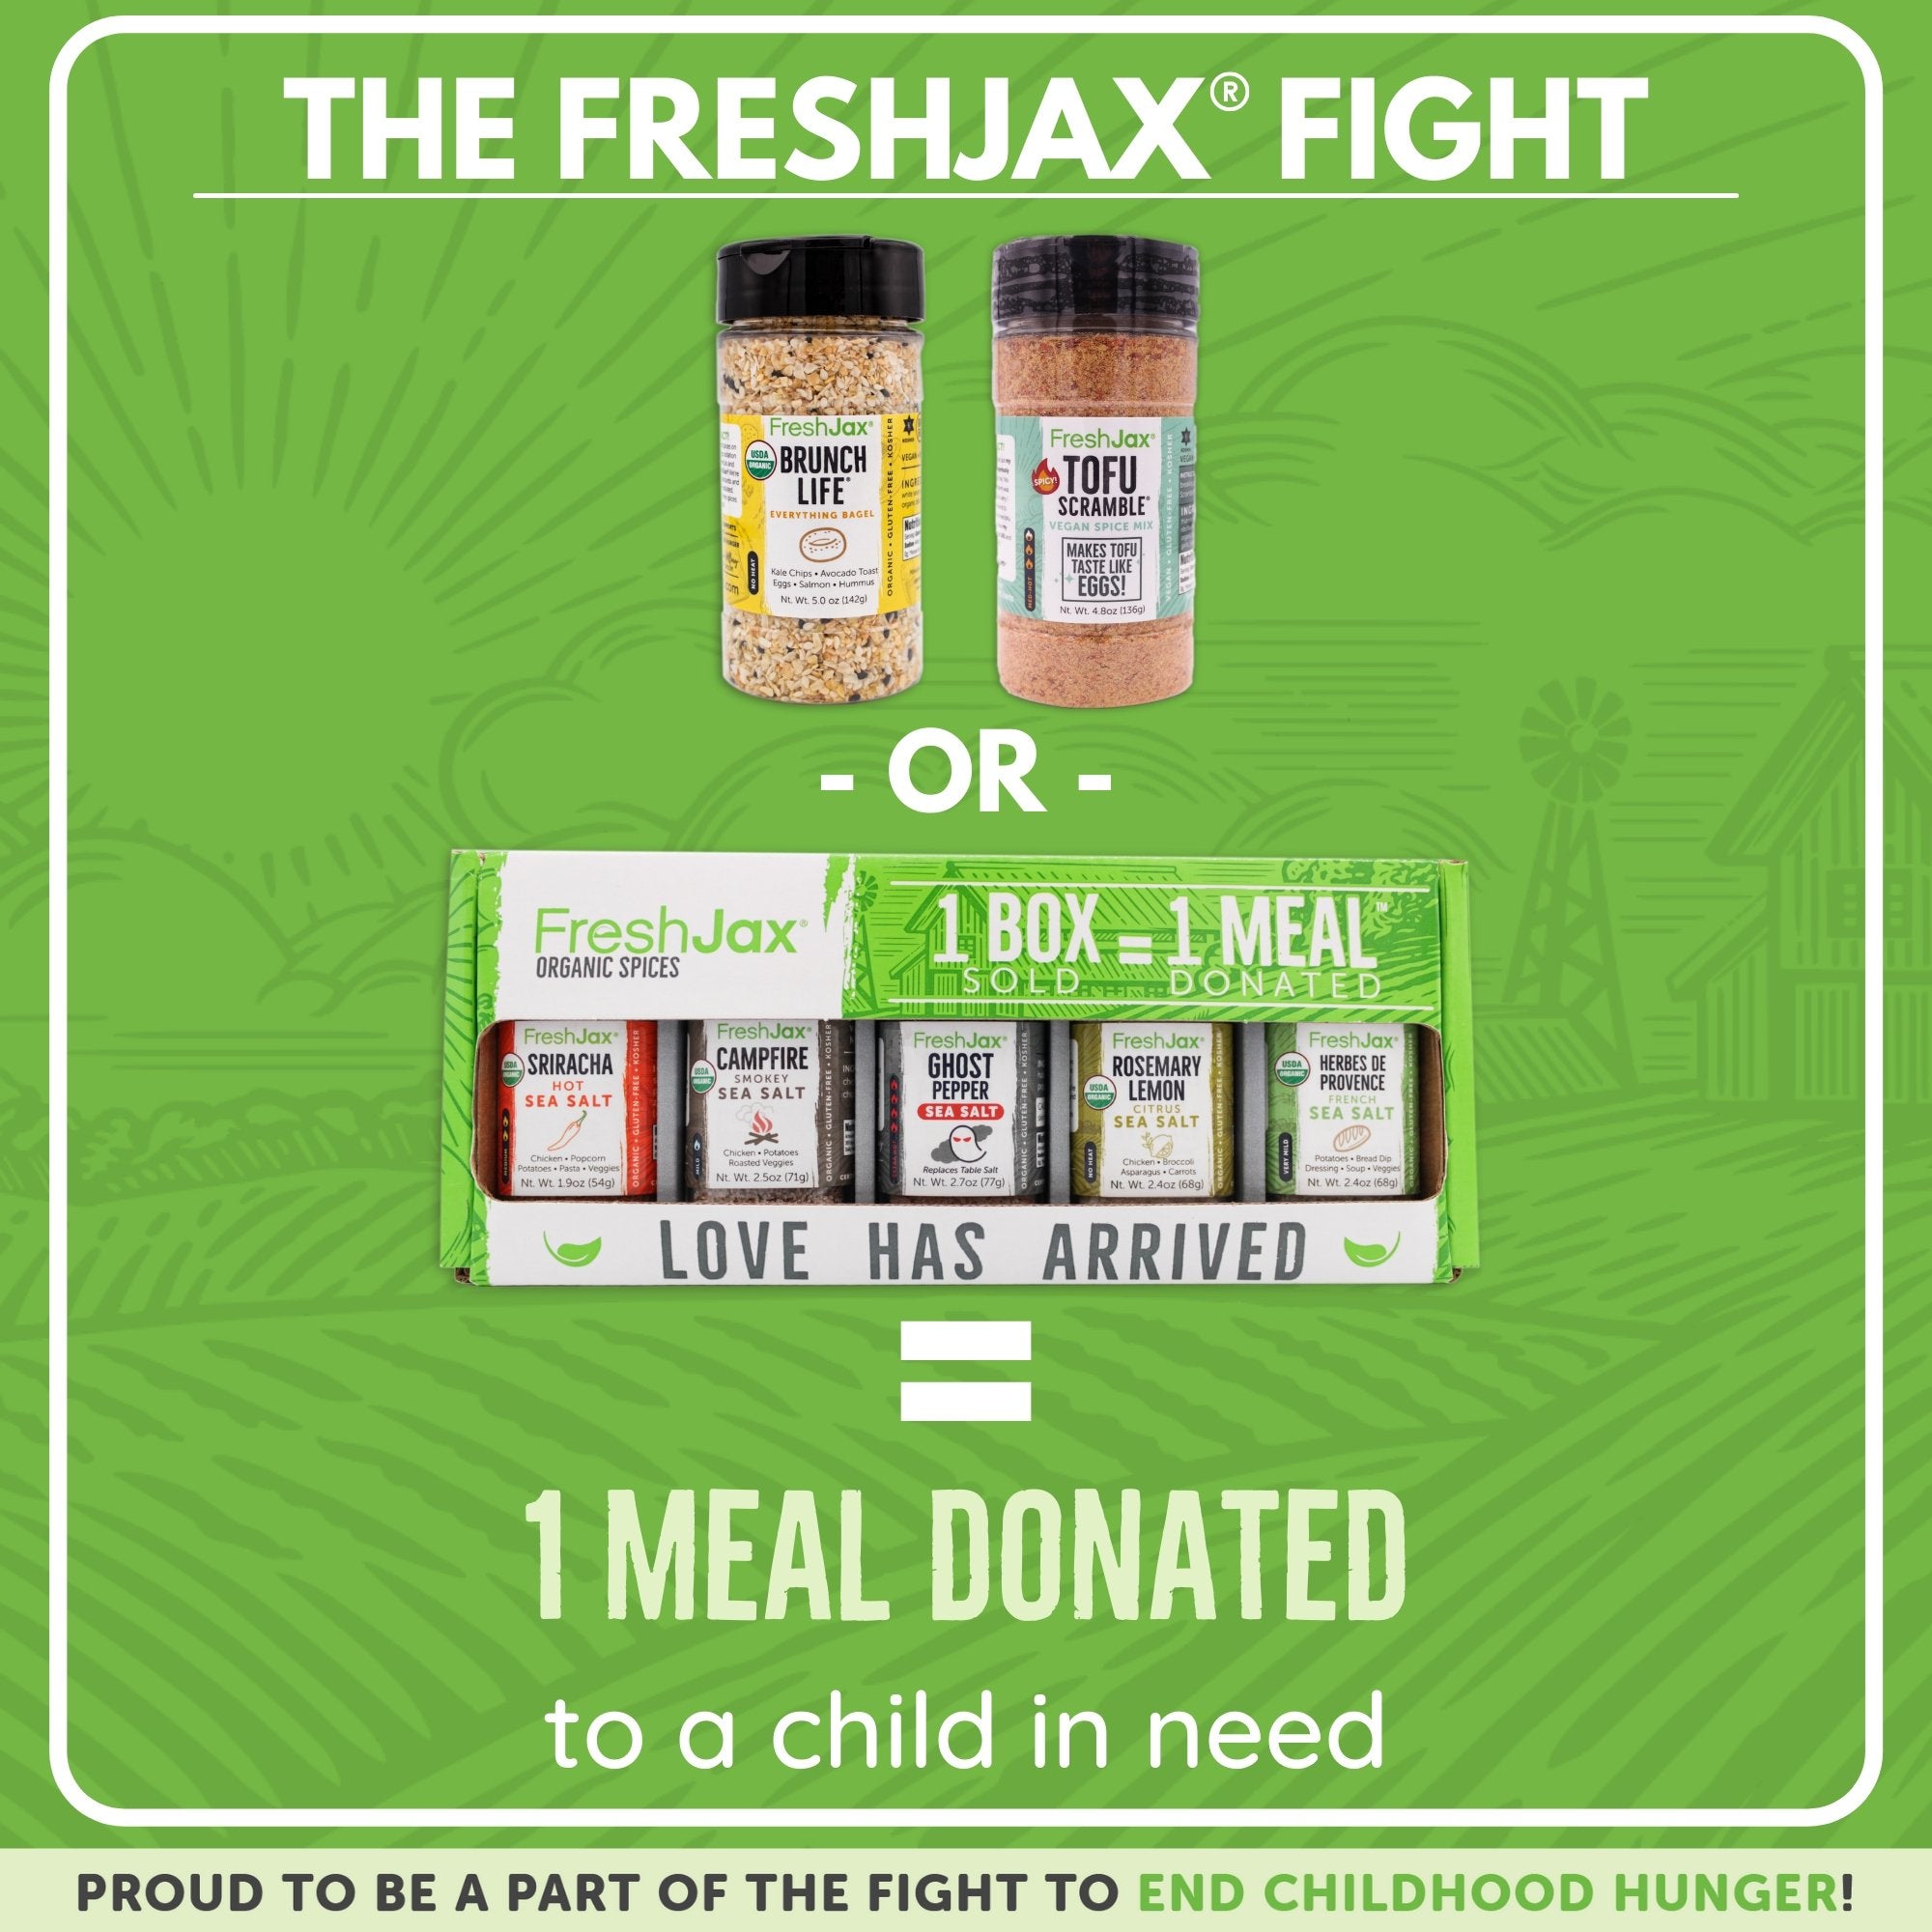 1 Box = 1 Meal Donated to a child in need